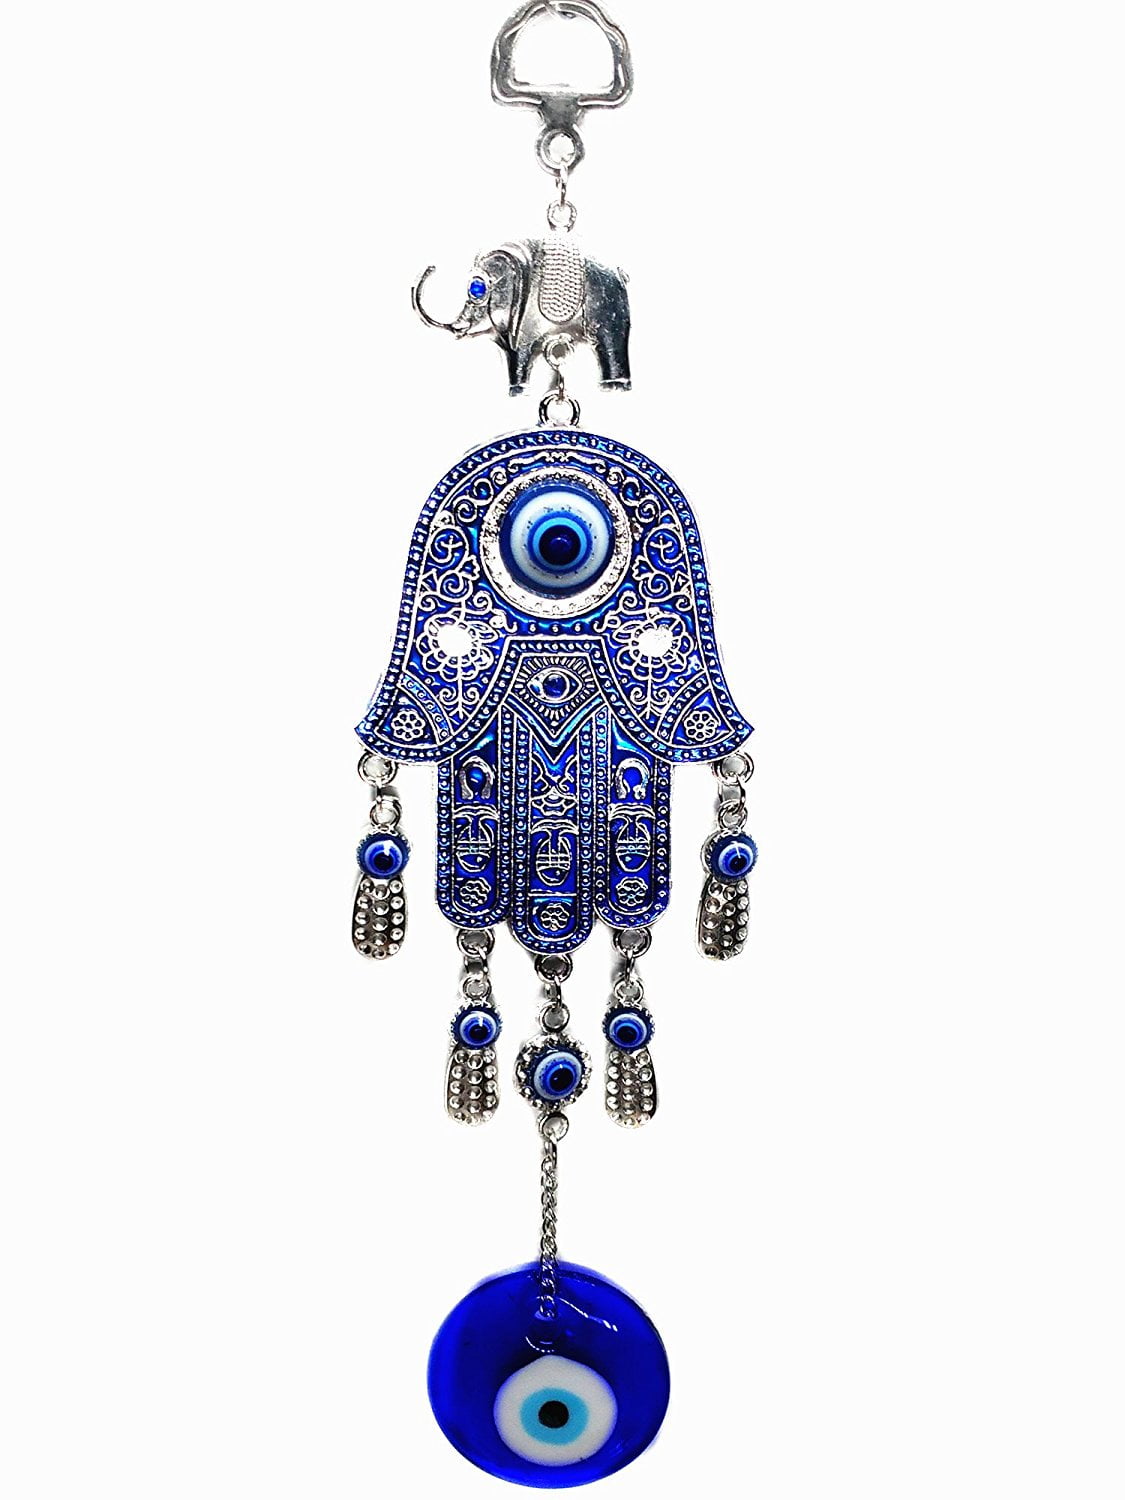 Betterdecor Blue Evil Eye Hanging for Protection with a Bag -058 